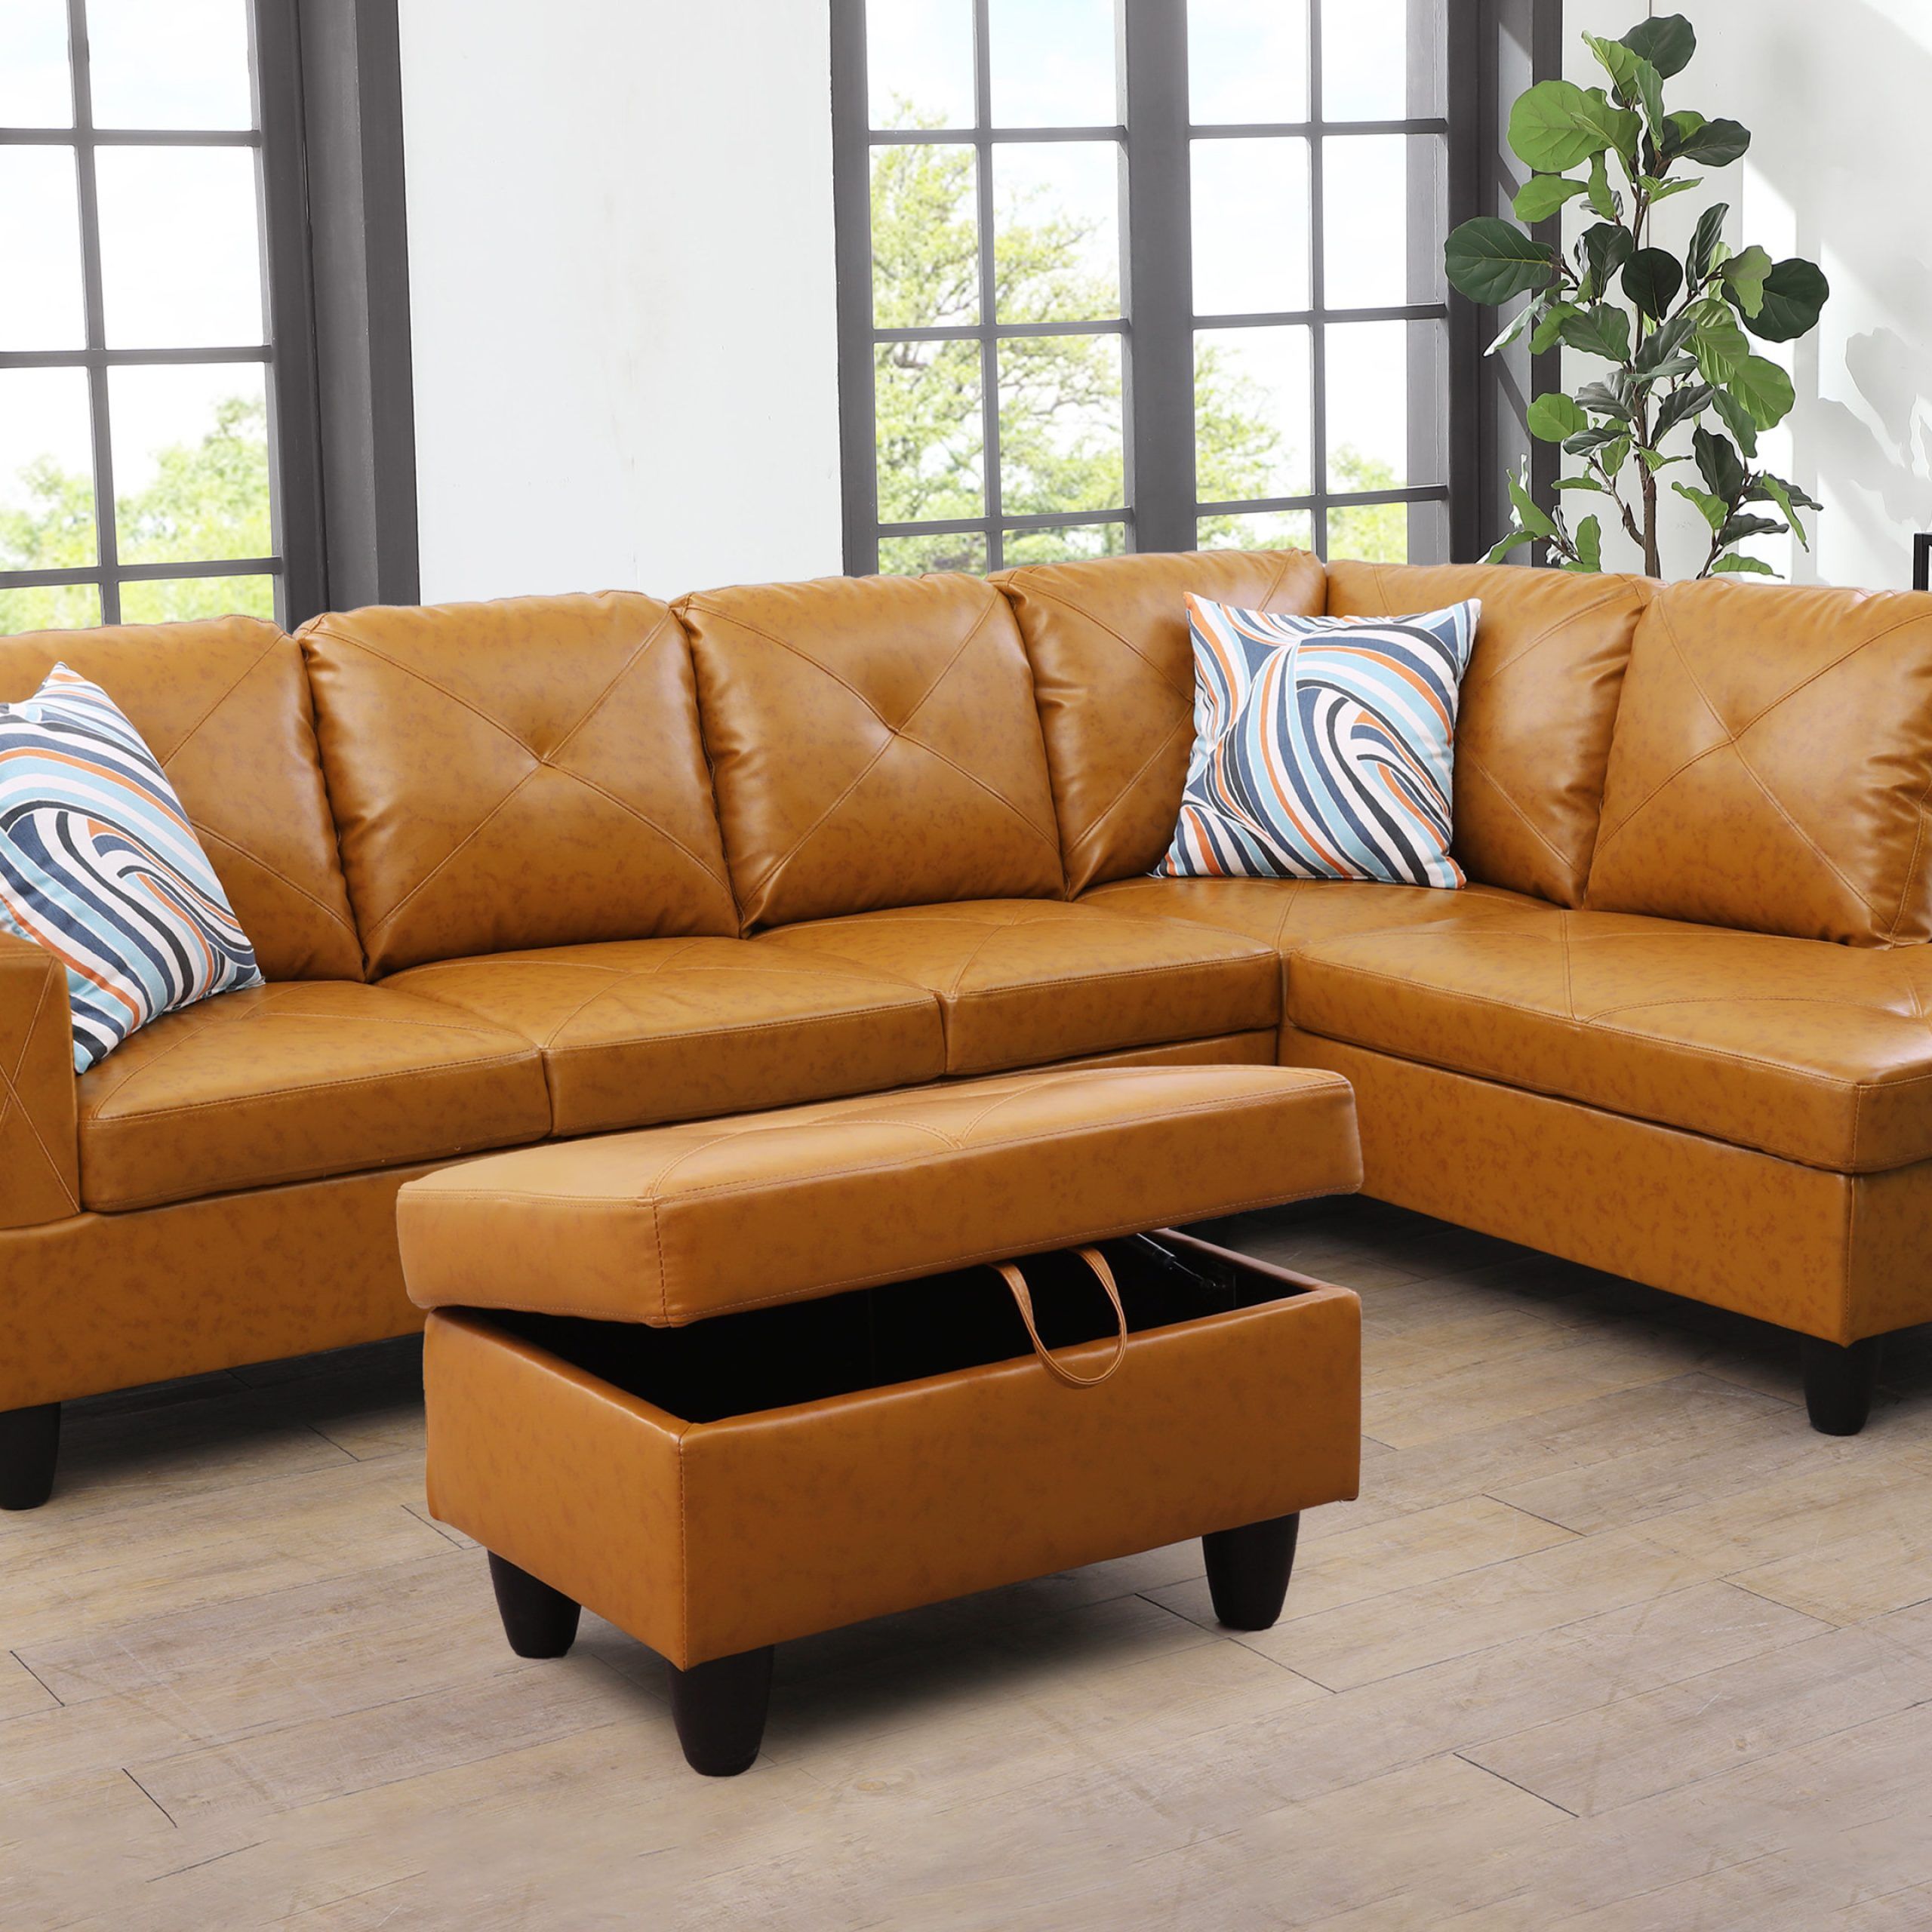 Ebern Designs 3 – Piece Vegan Leather Sectional & Reviews | Wayfair With 3 Piece Leather Sectional Sofa Sets (View 9 of 15)